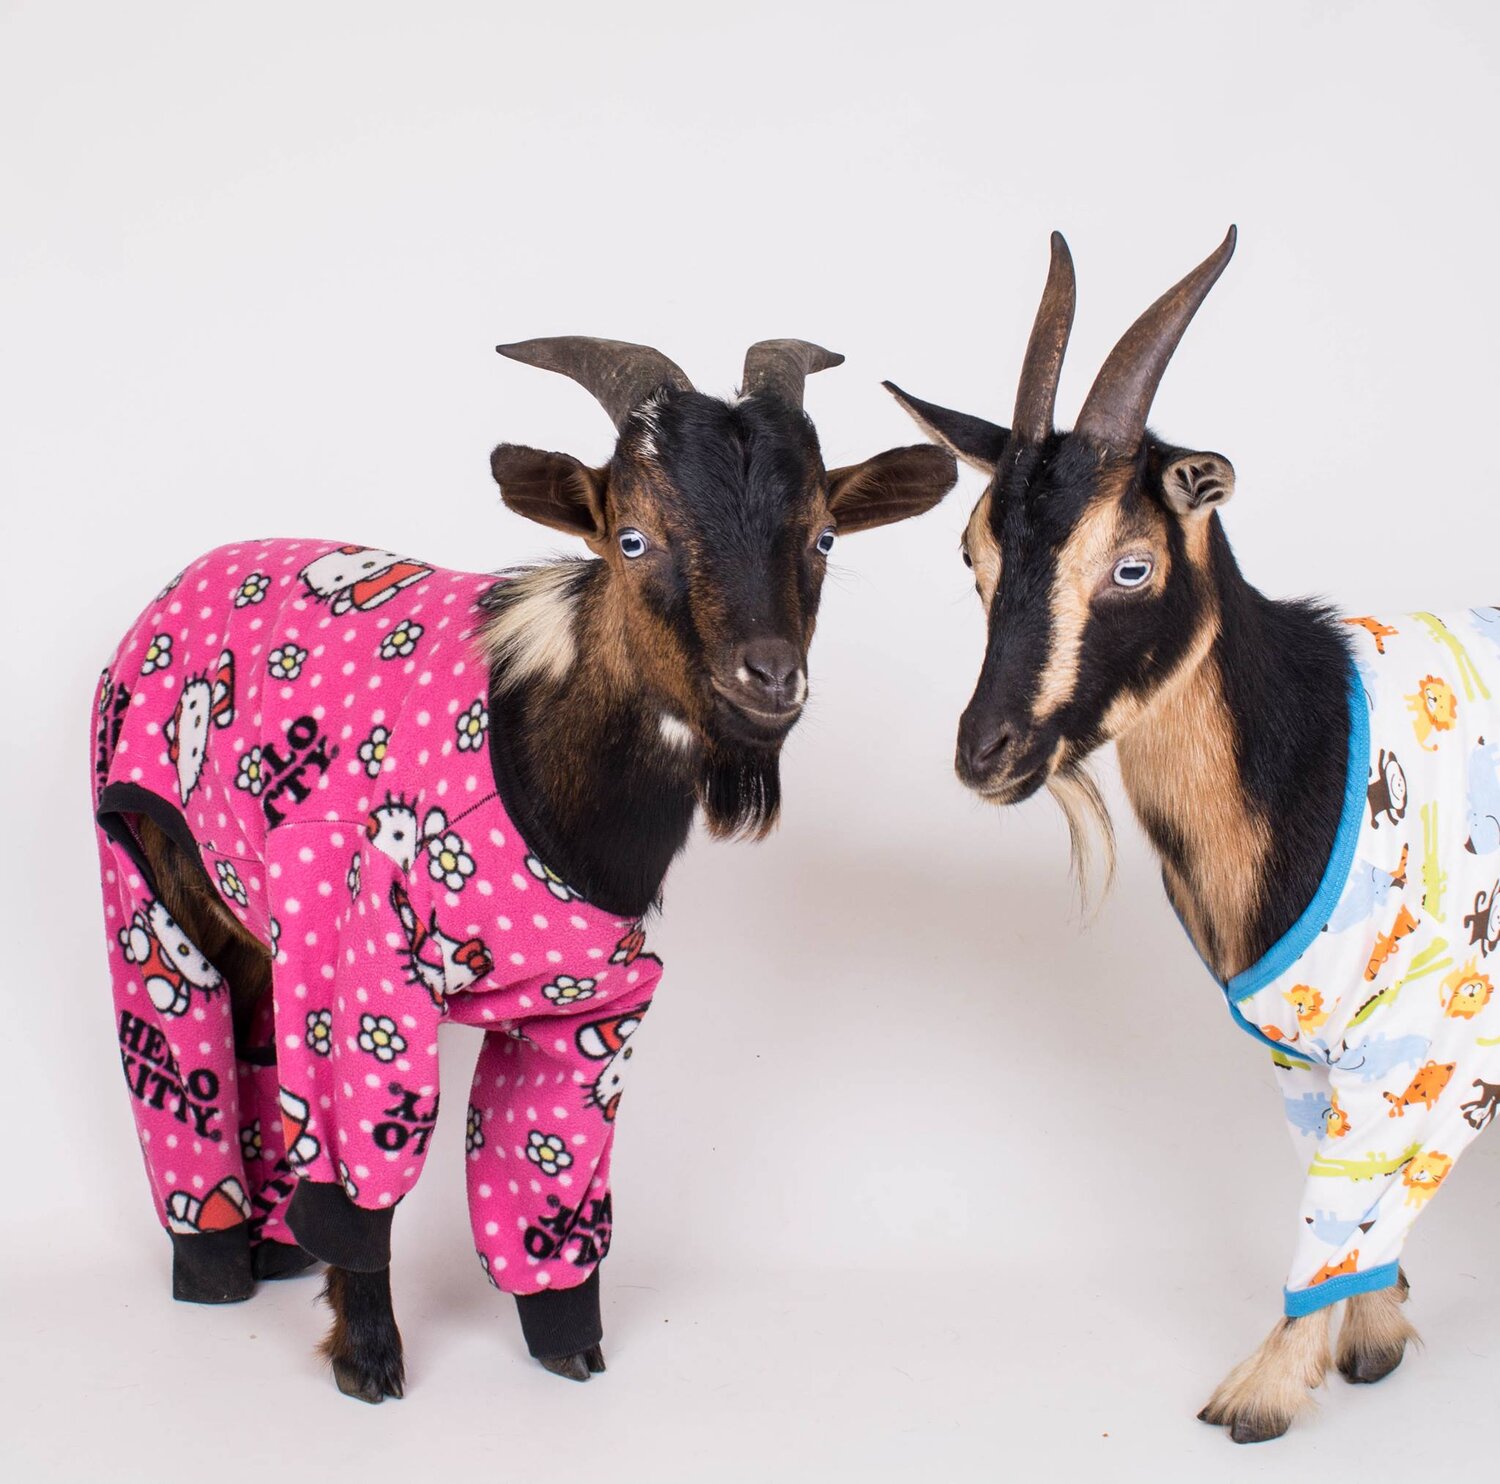 Photo + Video Shoots — Red Wagon Goats